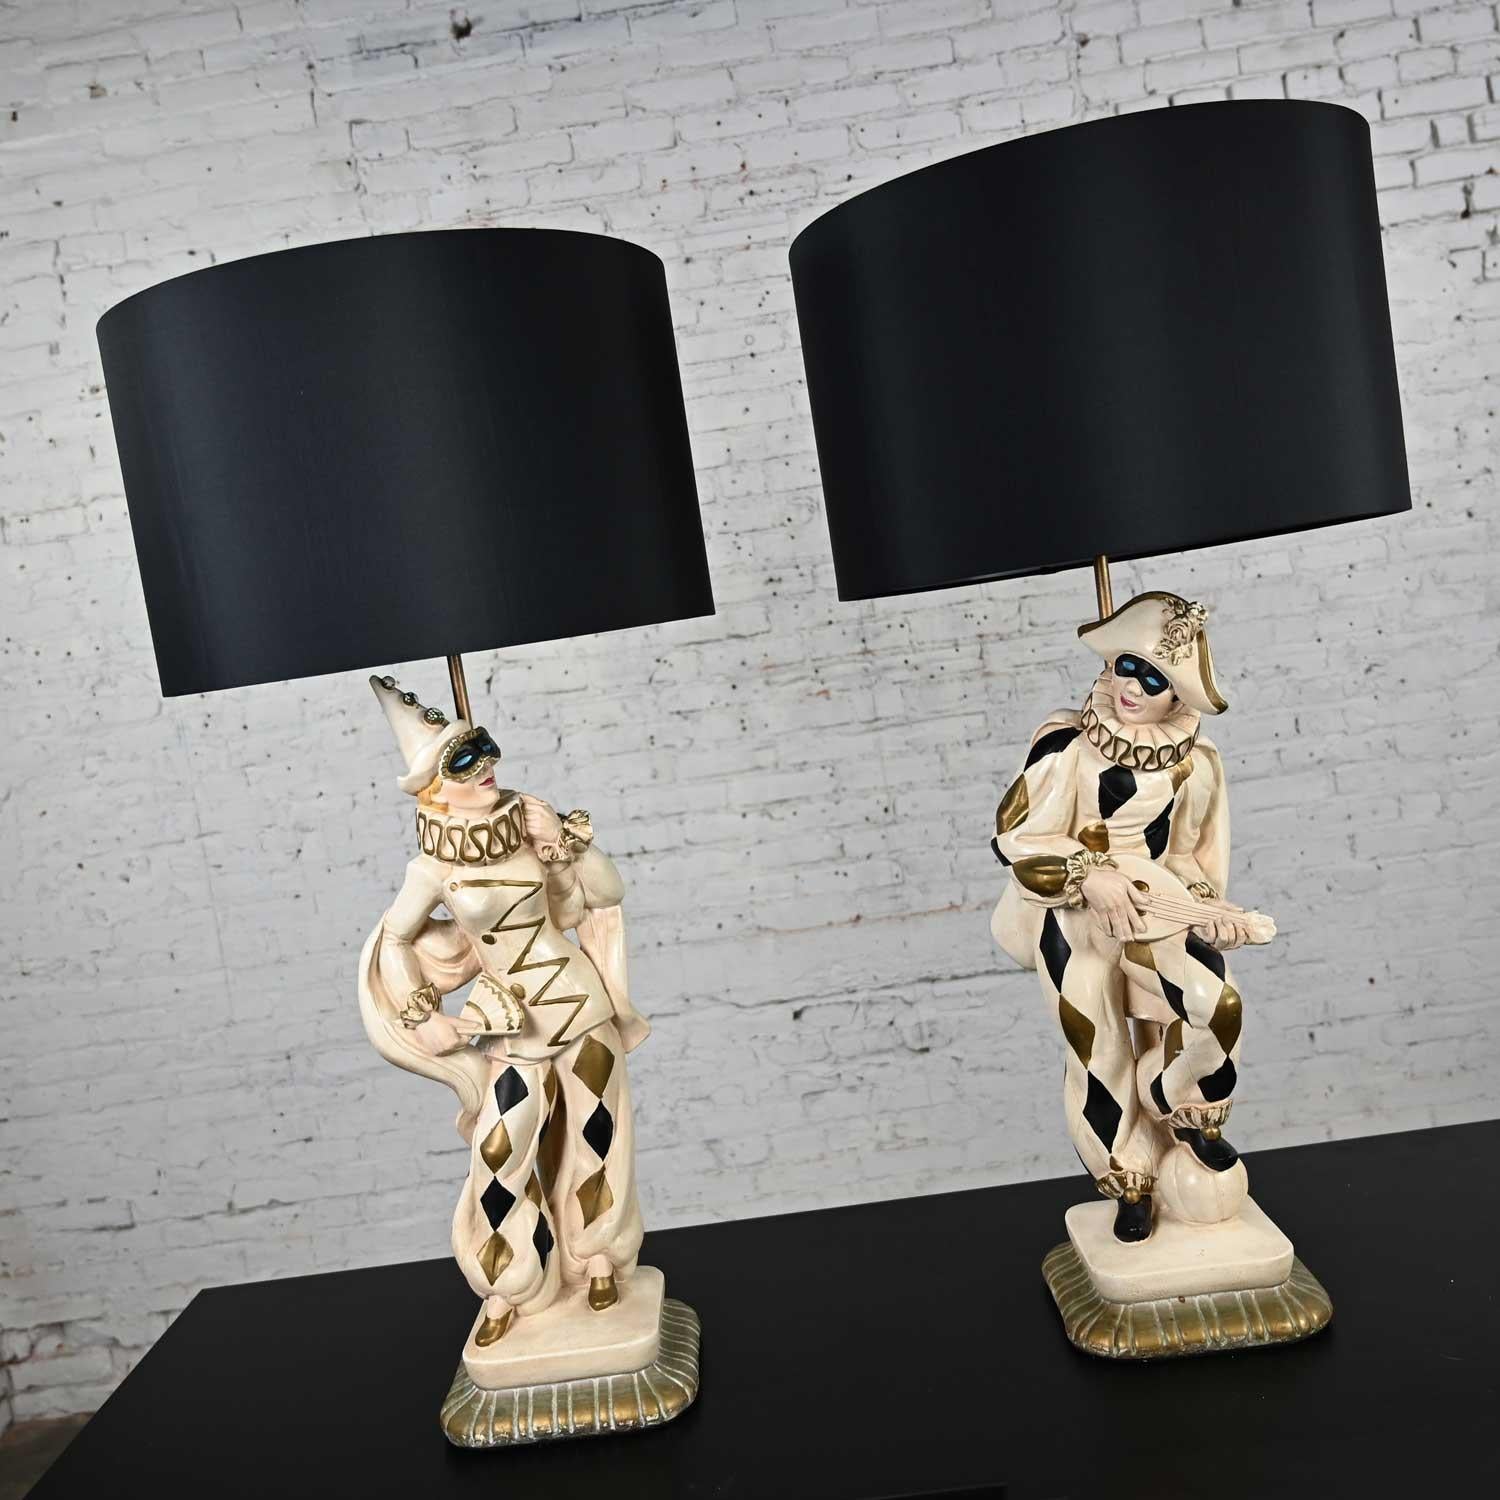 Enjoyable vintage MCM (Mid-Century Modern) Art Deco figural jester or harlequin table lamps in the style of Marbro, a pair. Comprised of molded plaster, hand painted details, antiqued gold painted stems and finials, and new black silk like drum